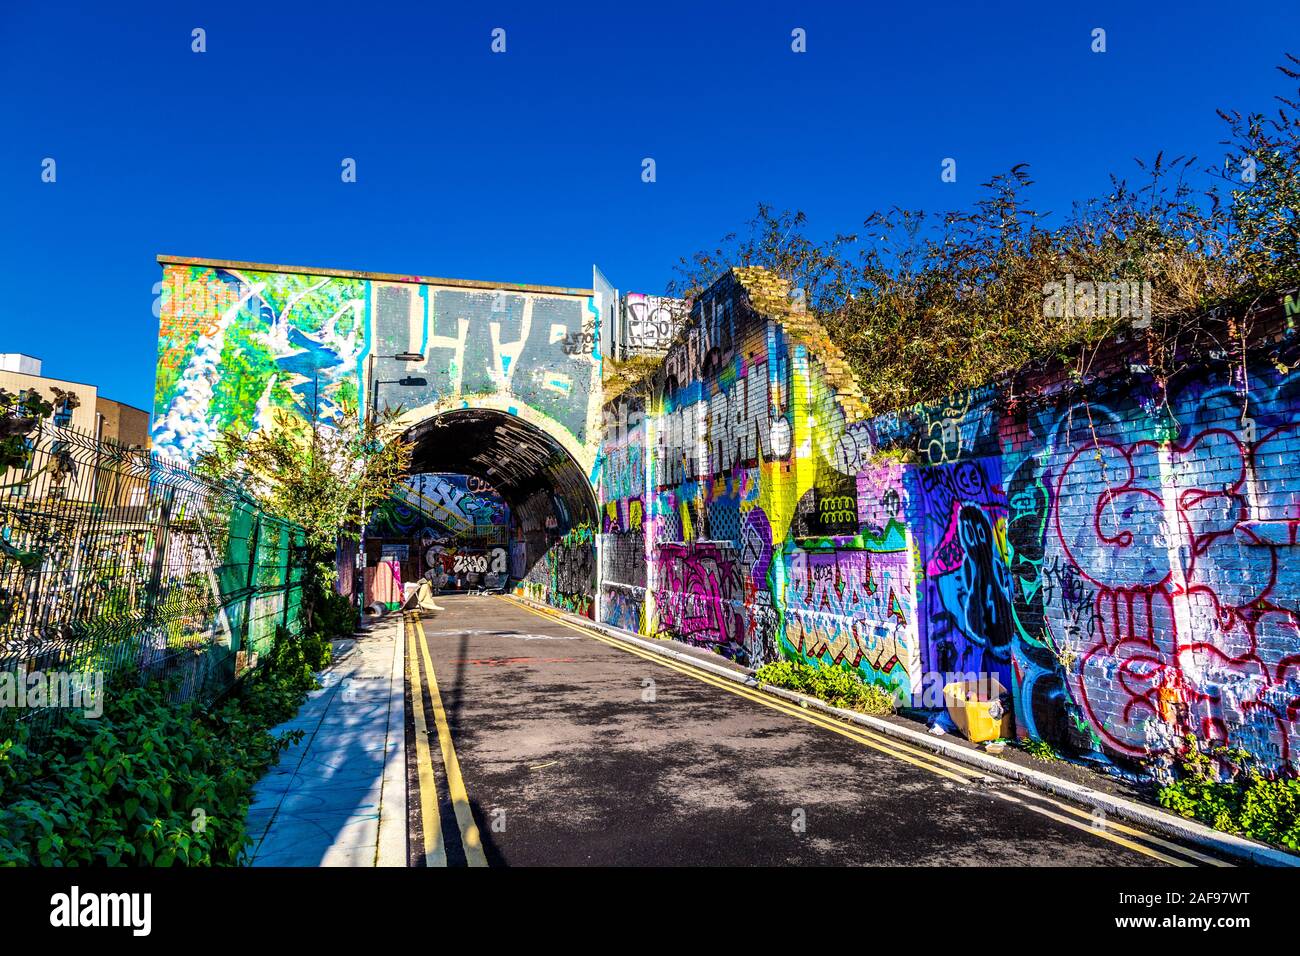 Pedley Street Arch covered with murals, graffiti and street art, London, UK Stock Photo